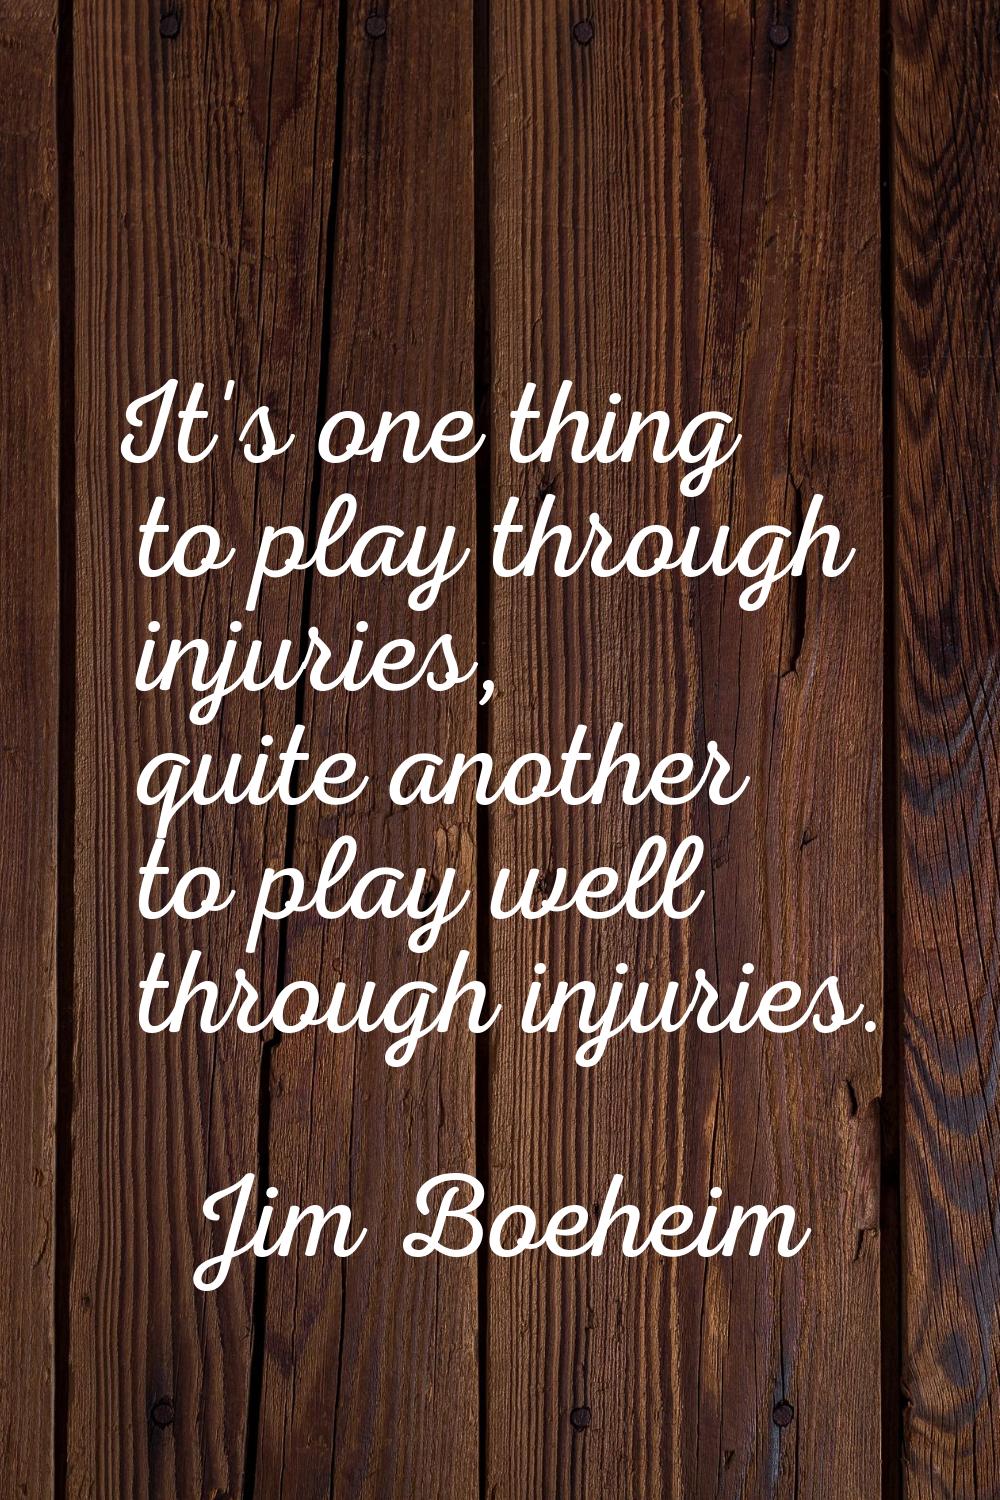 It's one thing to play through injuries, quite another to play well through injuries.